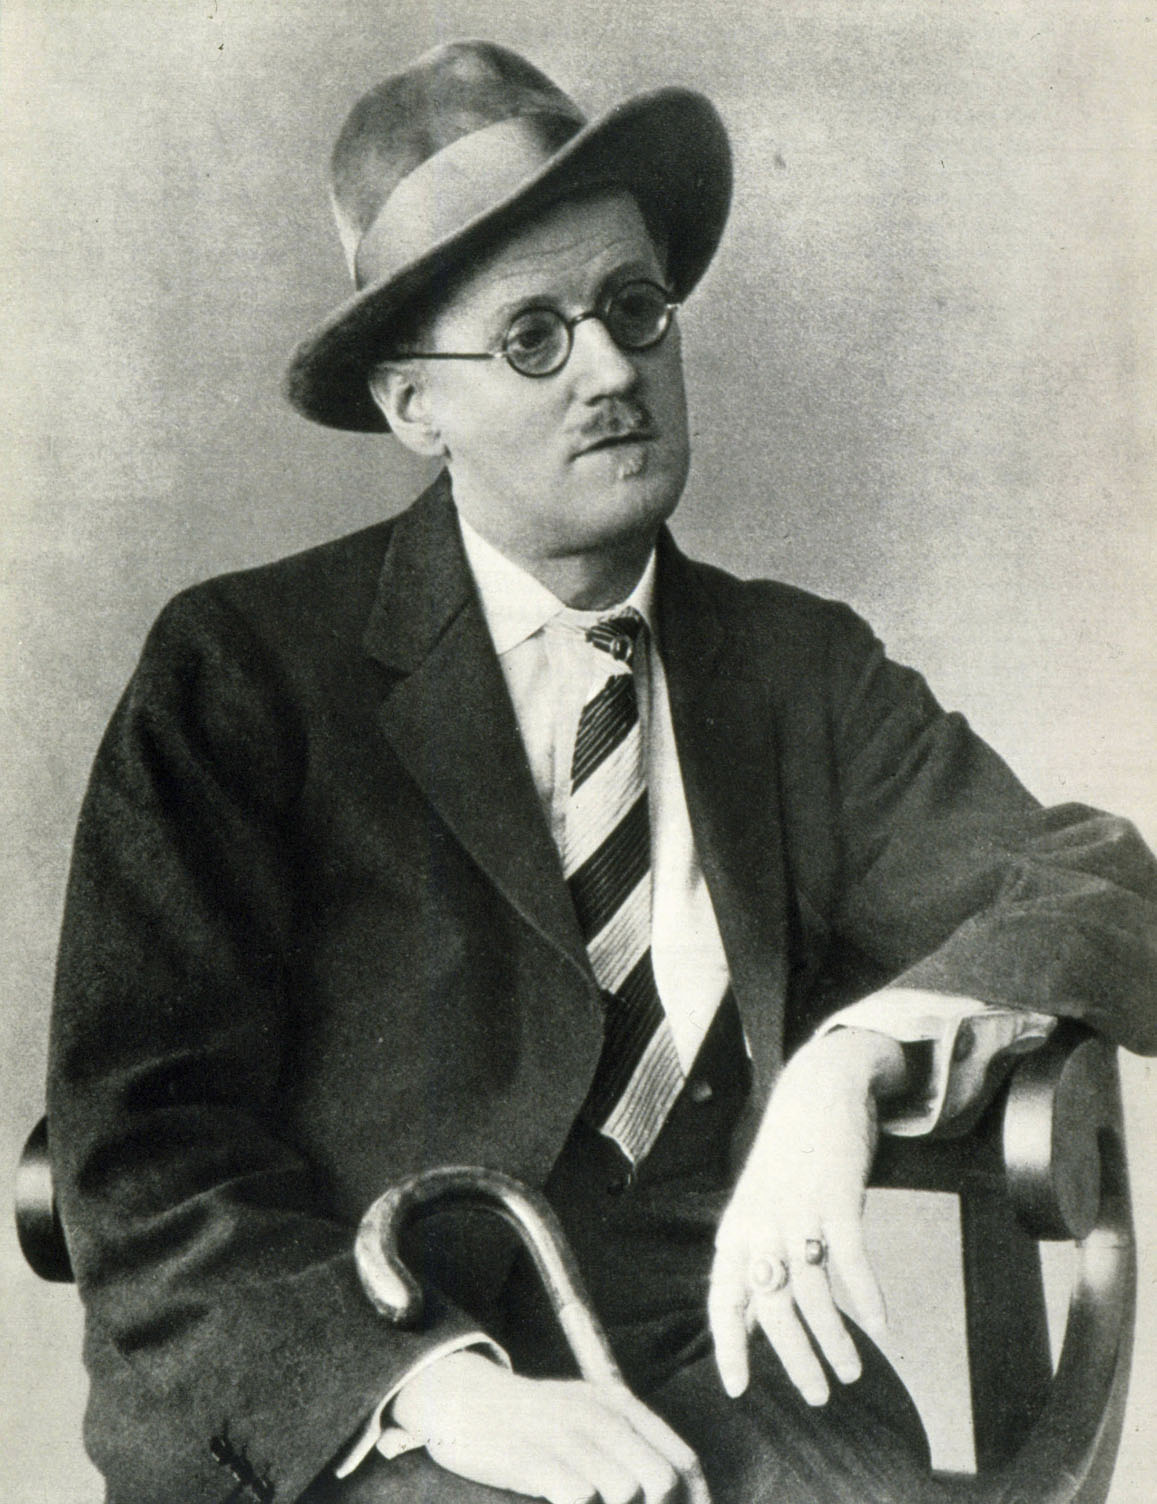 A portrait of James Joyce  taken in January 1941. (Culture Club/Getty Images)